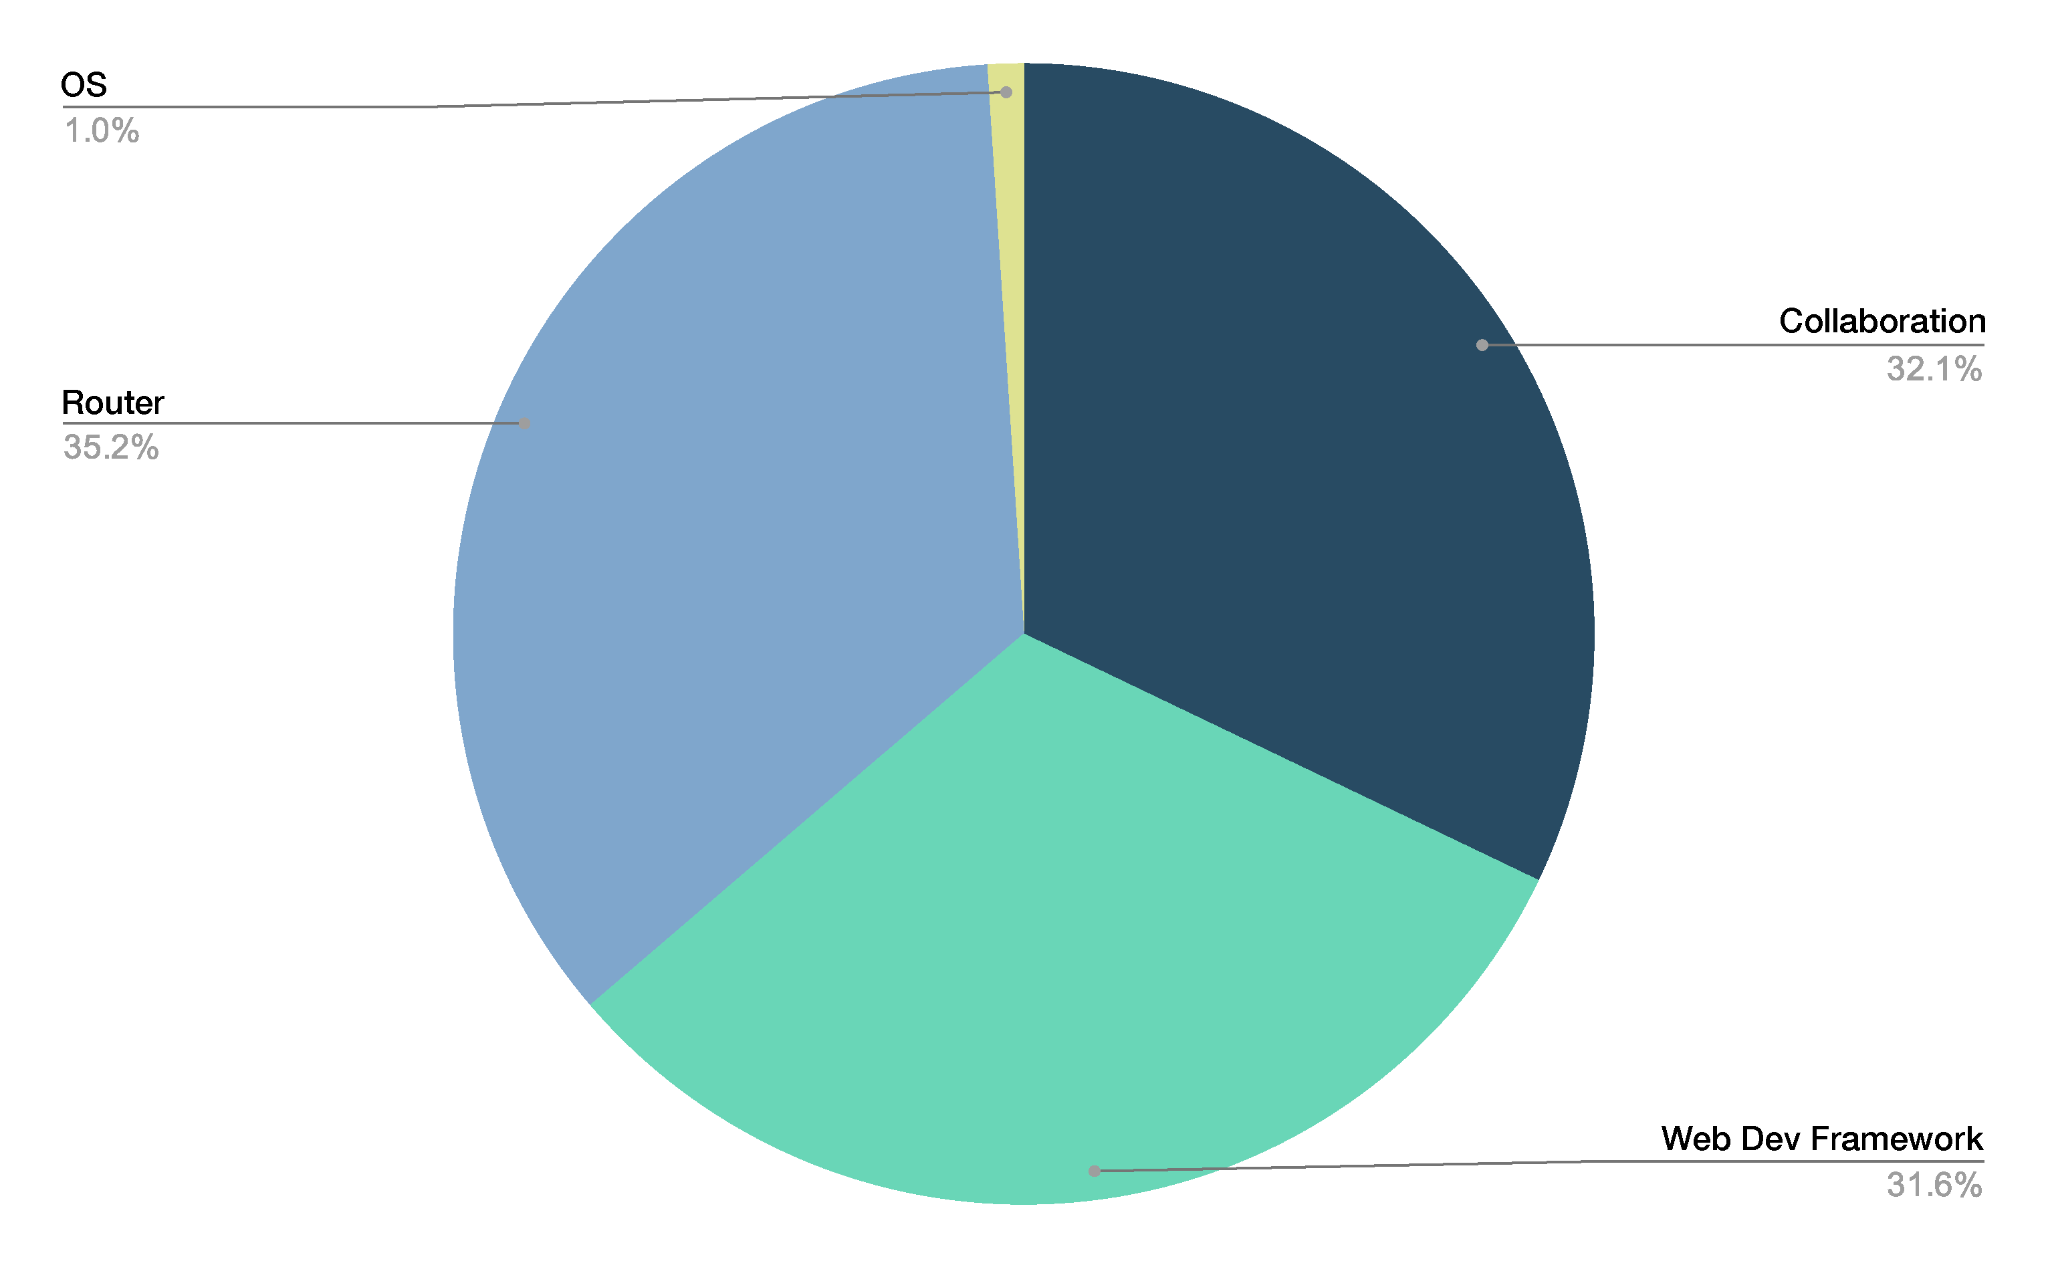 Image 5 is a pie chart of the categories of the top targeted entities. Collaboration, web development framework, and router are almost evenly split at 32.1%, 31.6%, and 35.2%, respectively. Operating system came in at 1%.